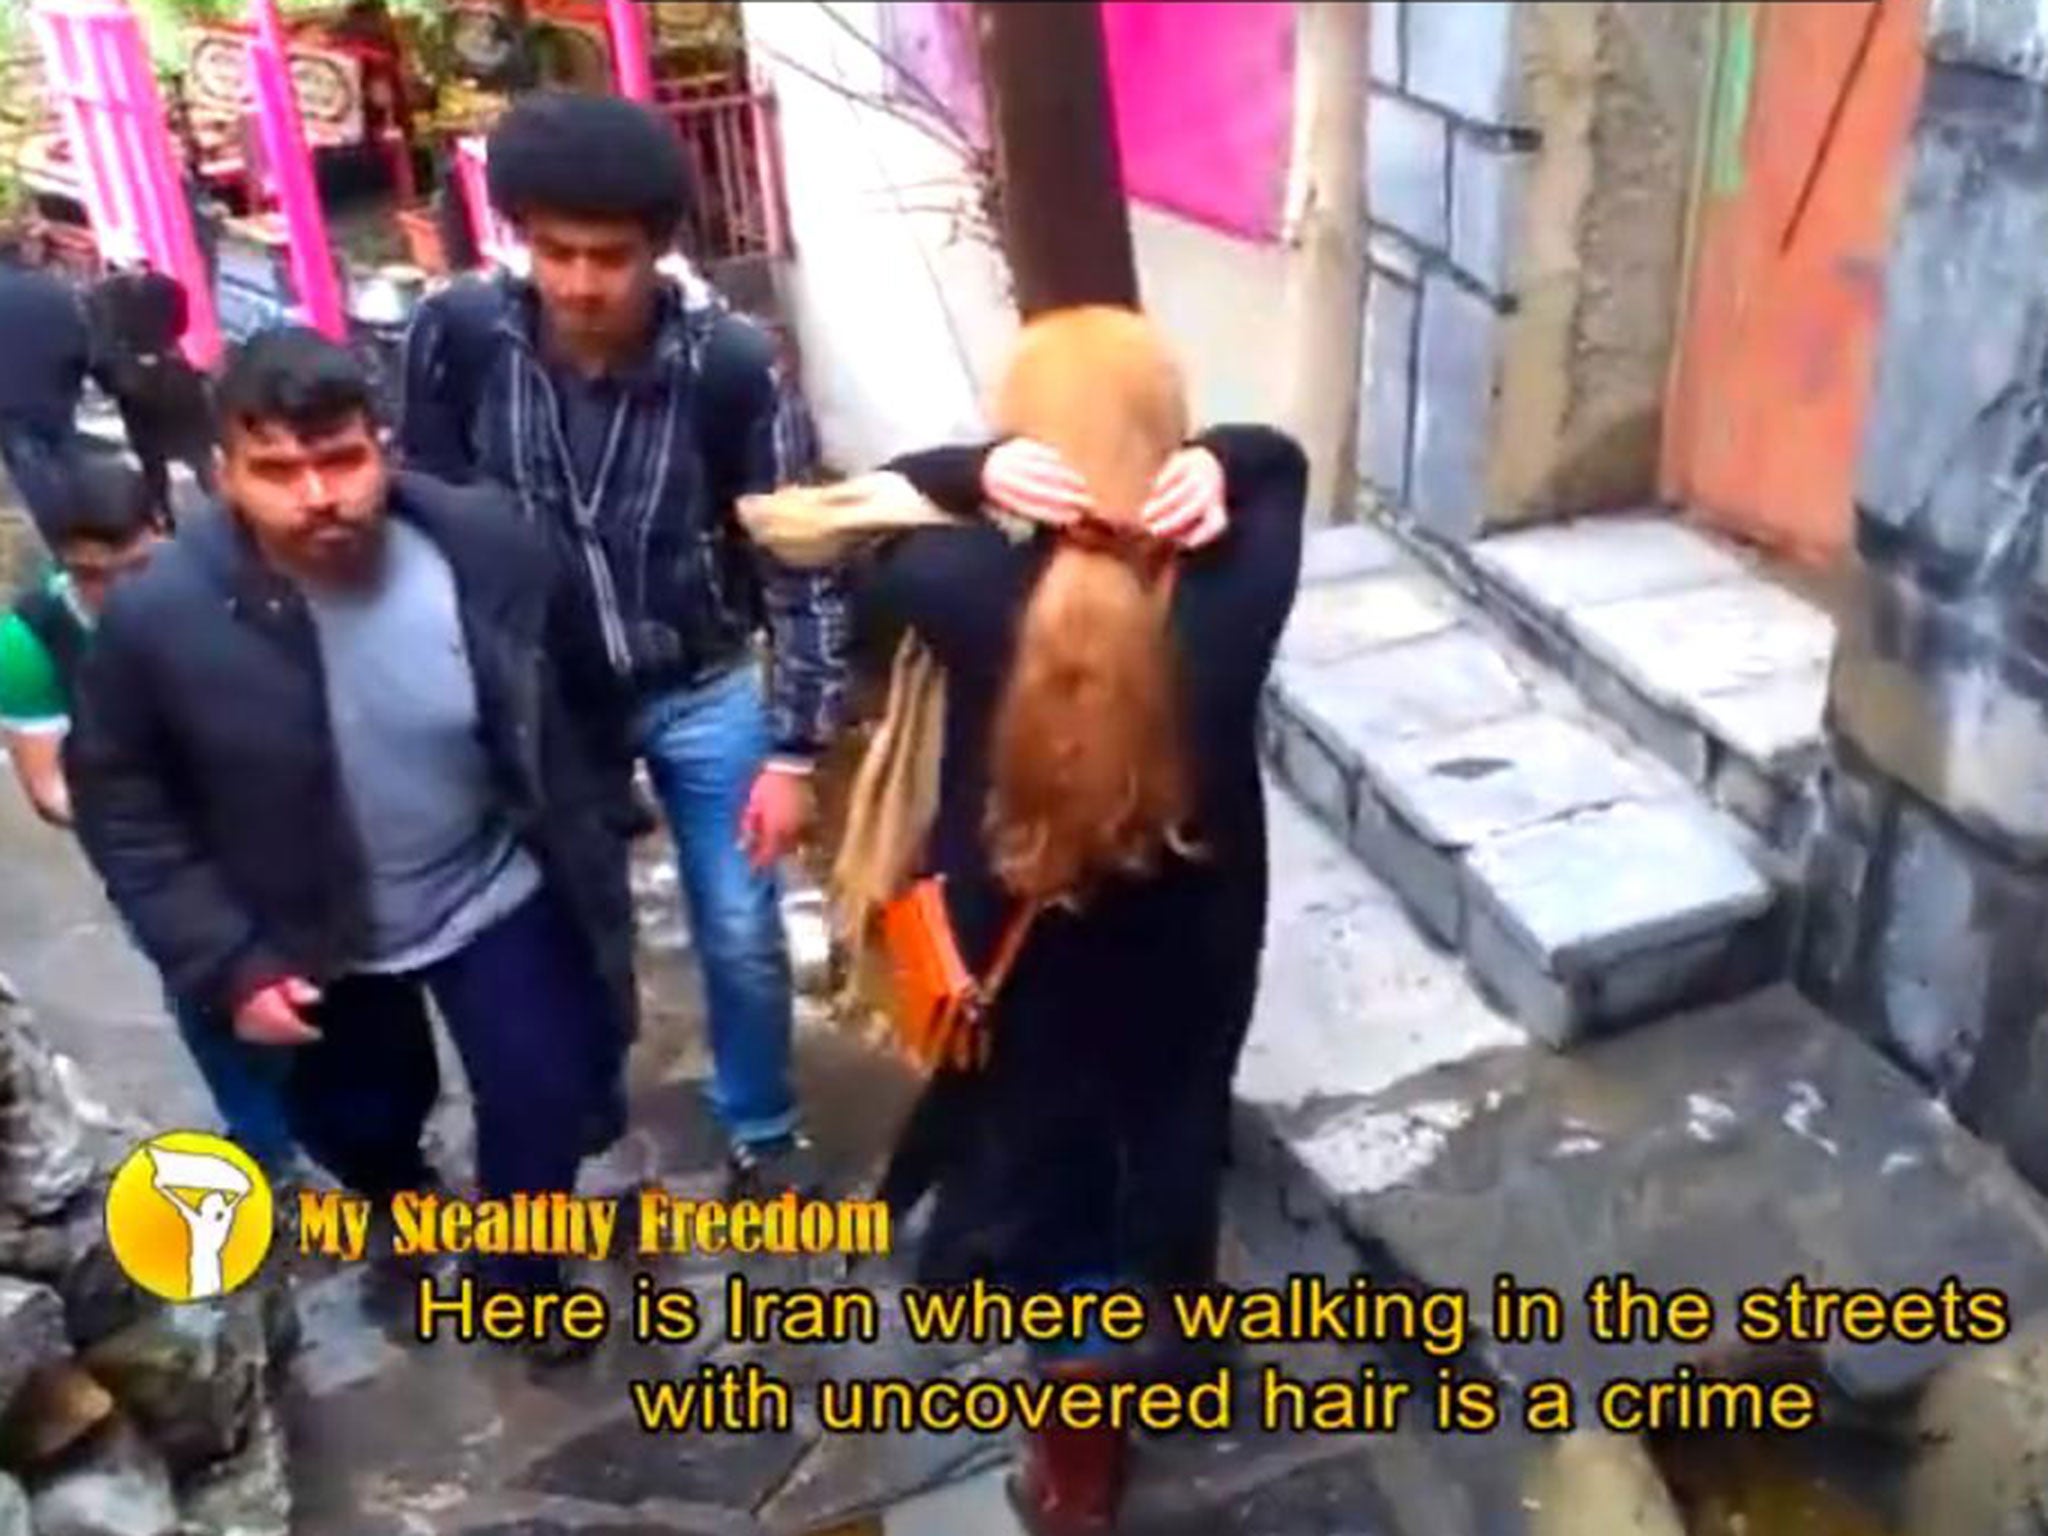 A woman walks through Tehran with her head uncovered 